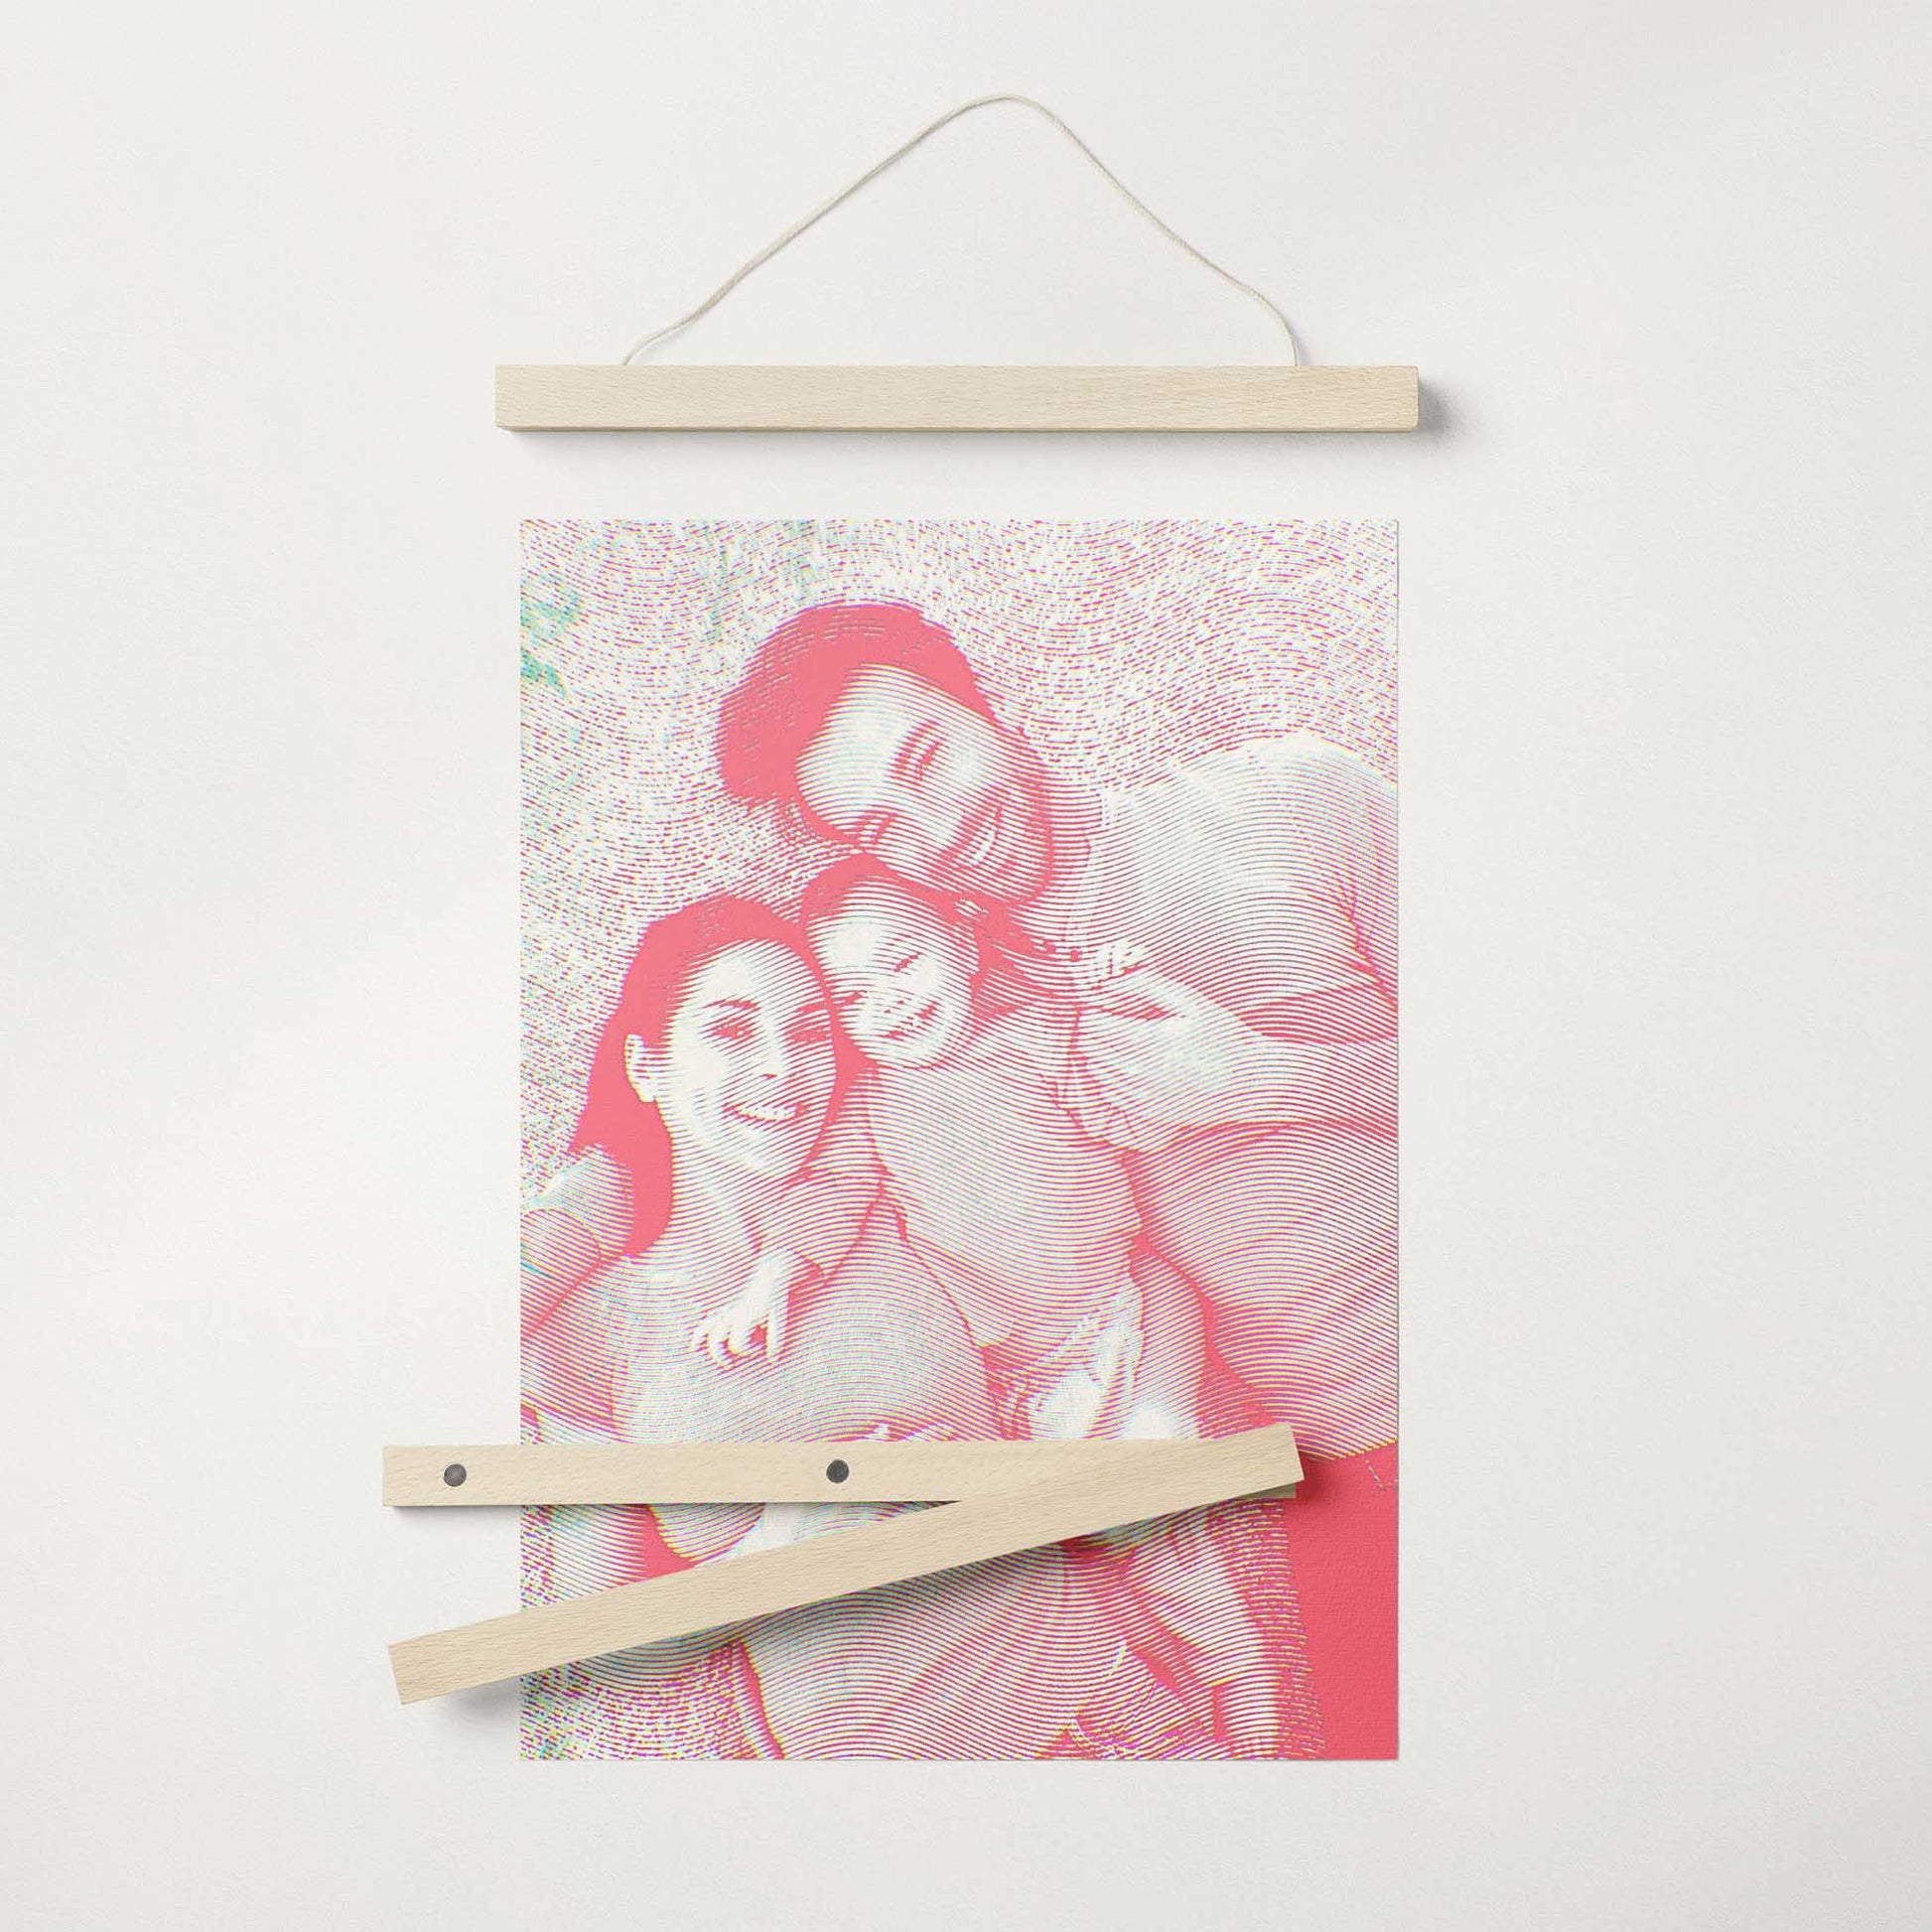 Share Joy and Laughter: Our Personalised Pink Engraving Poster Hanger makes a wonderful gift for family and friends. The vibrant colors and joyful design will bring smiles and laughter to their faces